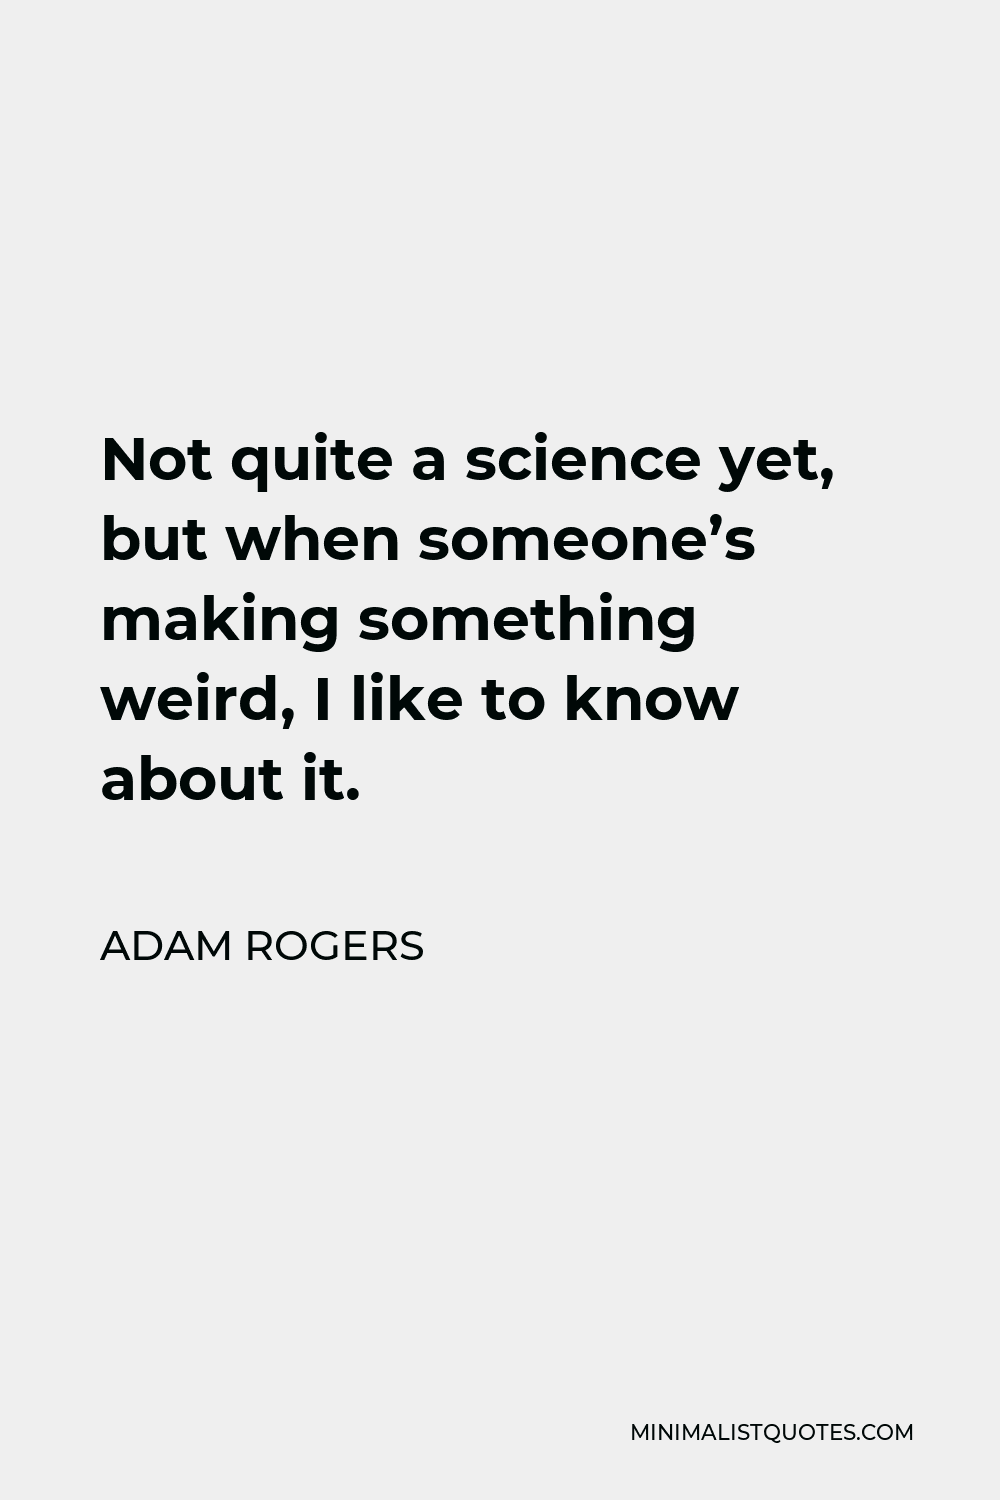 Adam Rogers Quote - Not quite a science yet, but when someone’s making something weird, I like to know about it.